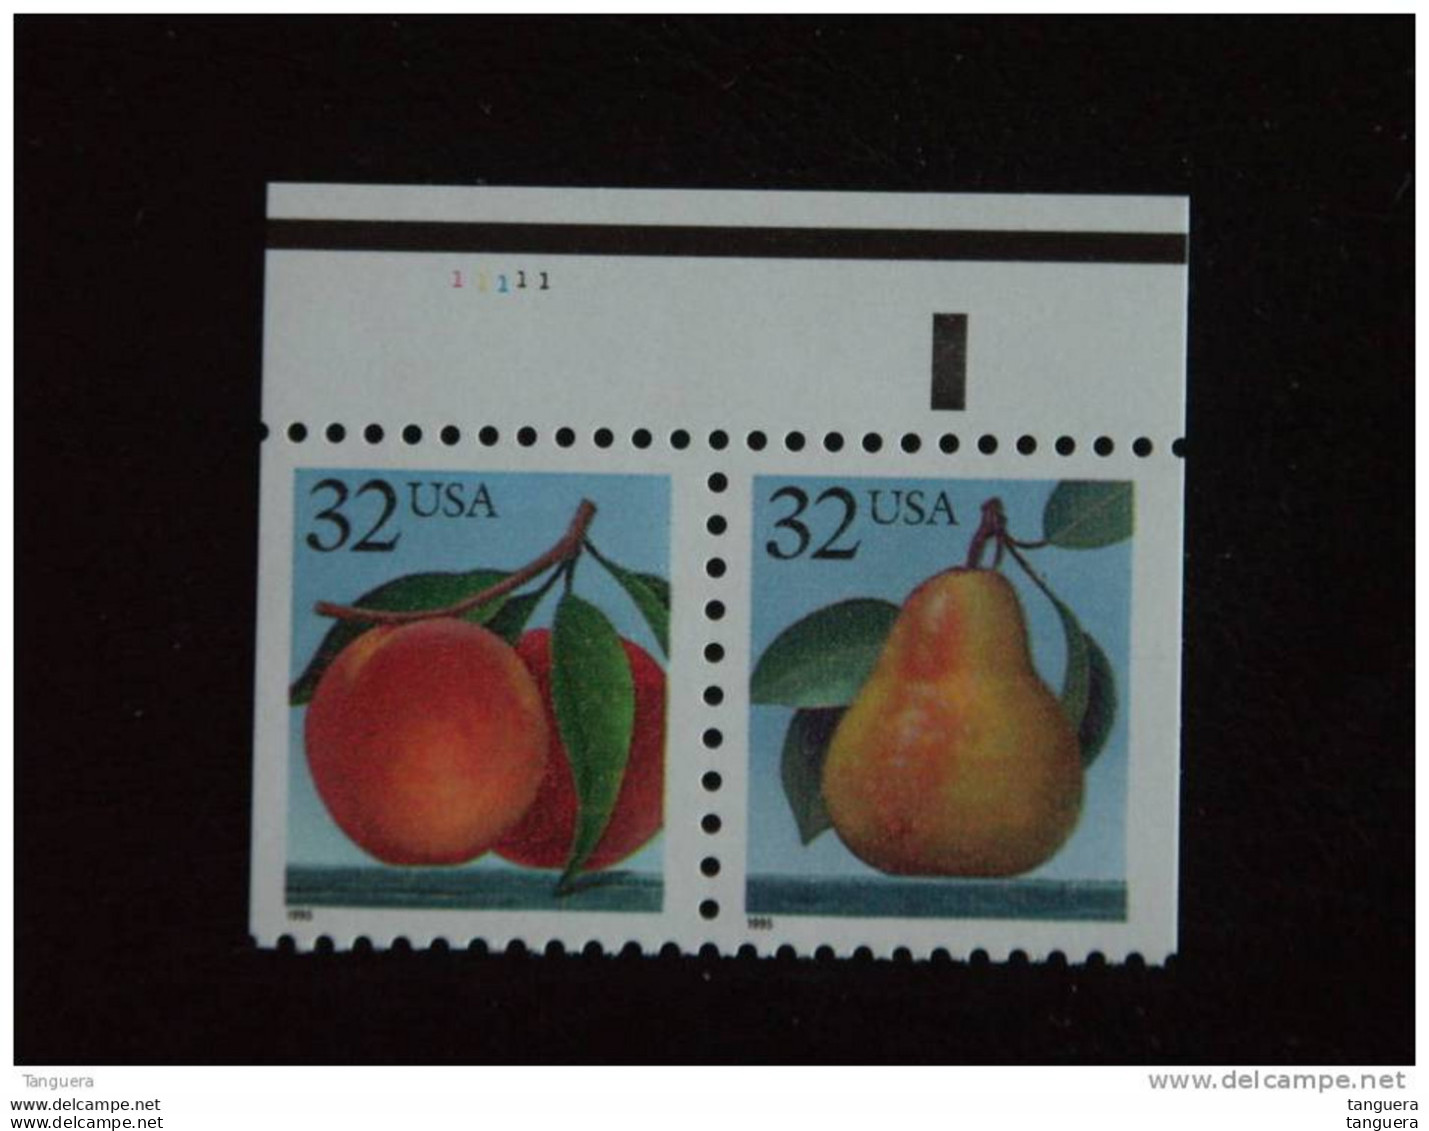 USA Etats-Unis United States 1995 Peaches And Pears Fruit Yv 2382-2383 MNH ** Plate N° 1111 - Neufs